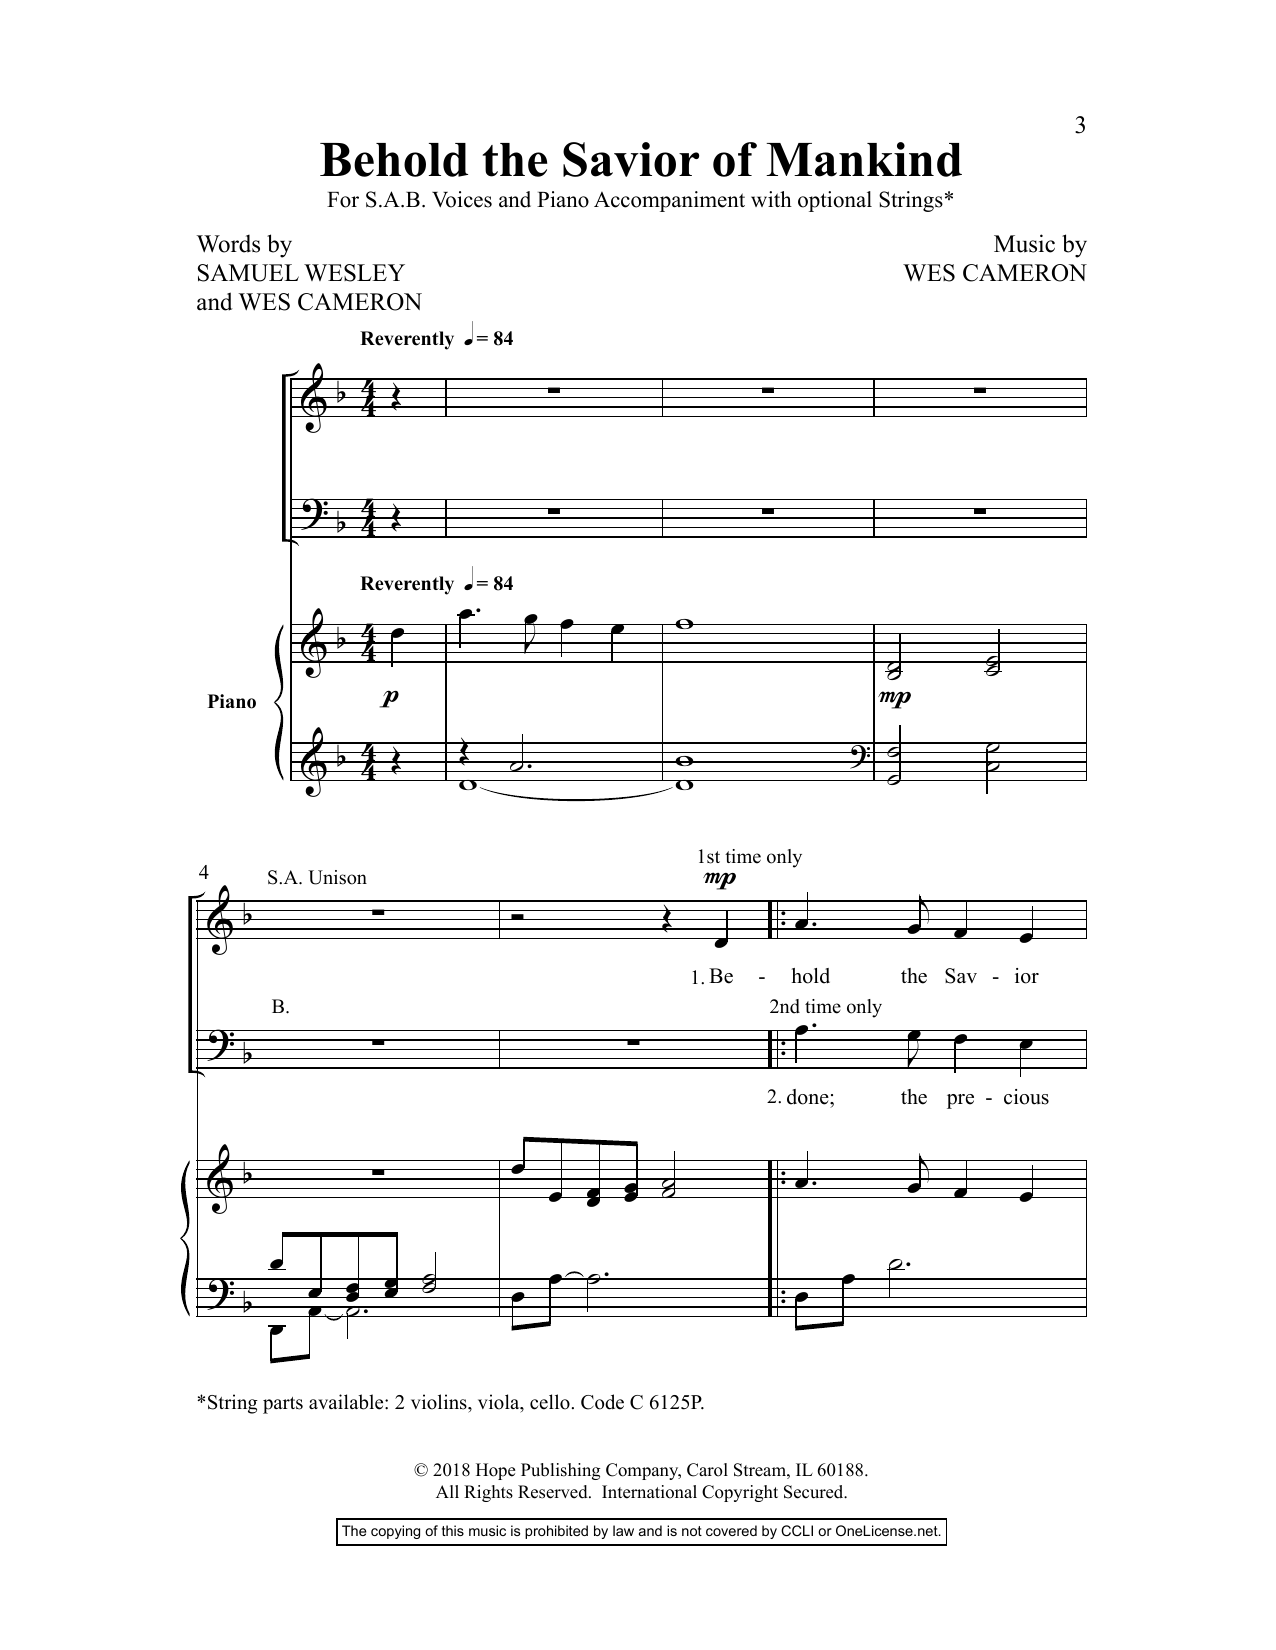 Samuel Wesley Behold the Savior of Mankind sheet music preview music notes and score for Choir including 6 page(s)